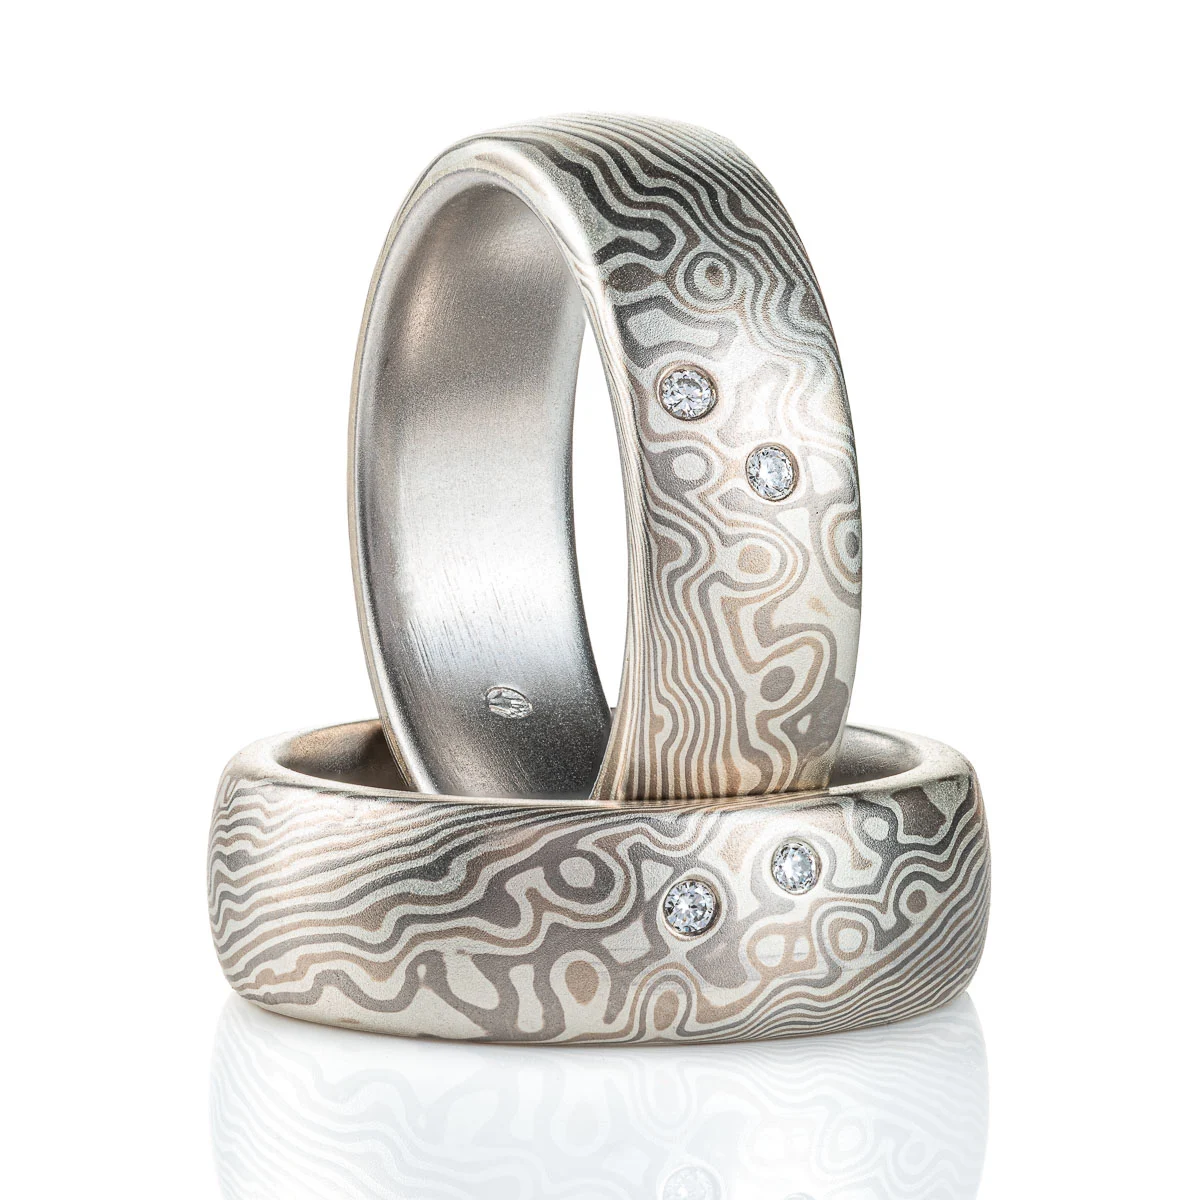 This beautiful Mokume Gane ring set has the perfect celestial vibe. These matching rings are shown in the combo Twist/Droplet pattern and Smoke Palette, with a low dome profile, and a satin finish. The Smoke palette features a three metal combination of 14k White Gold, Palladium, and Sterling Silver. These rings also each have two small diamonds set into the droplets of the pattern to create the effect of stars twinkling.